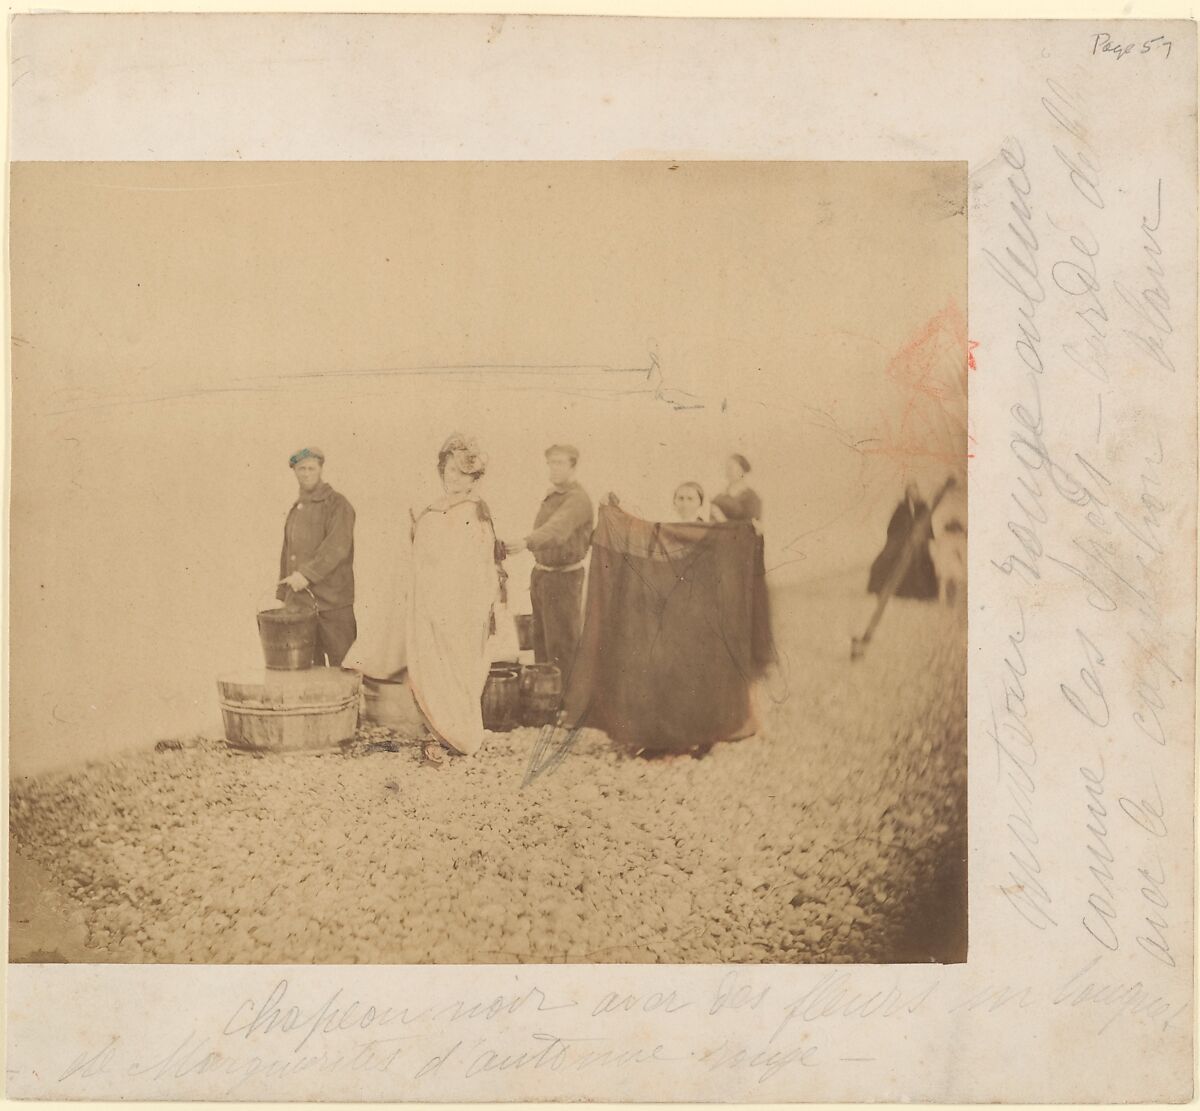 [La Comtesse with Group on a Rocky Beach], Pierre-Louis Pierson (French, 1822–1913), Albumen silver print from glass negative 